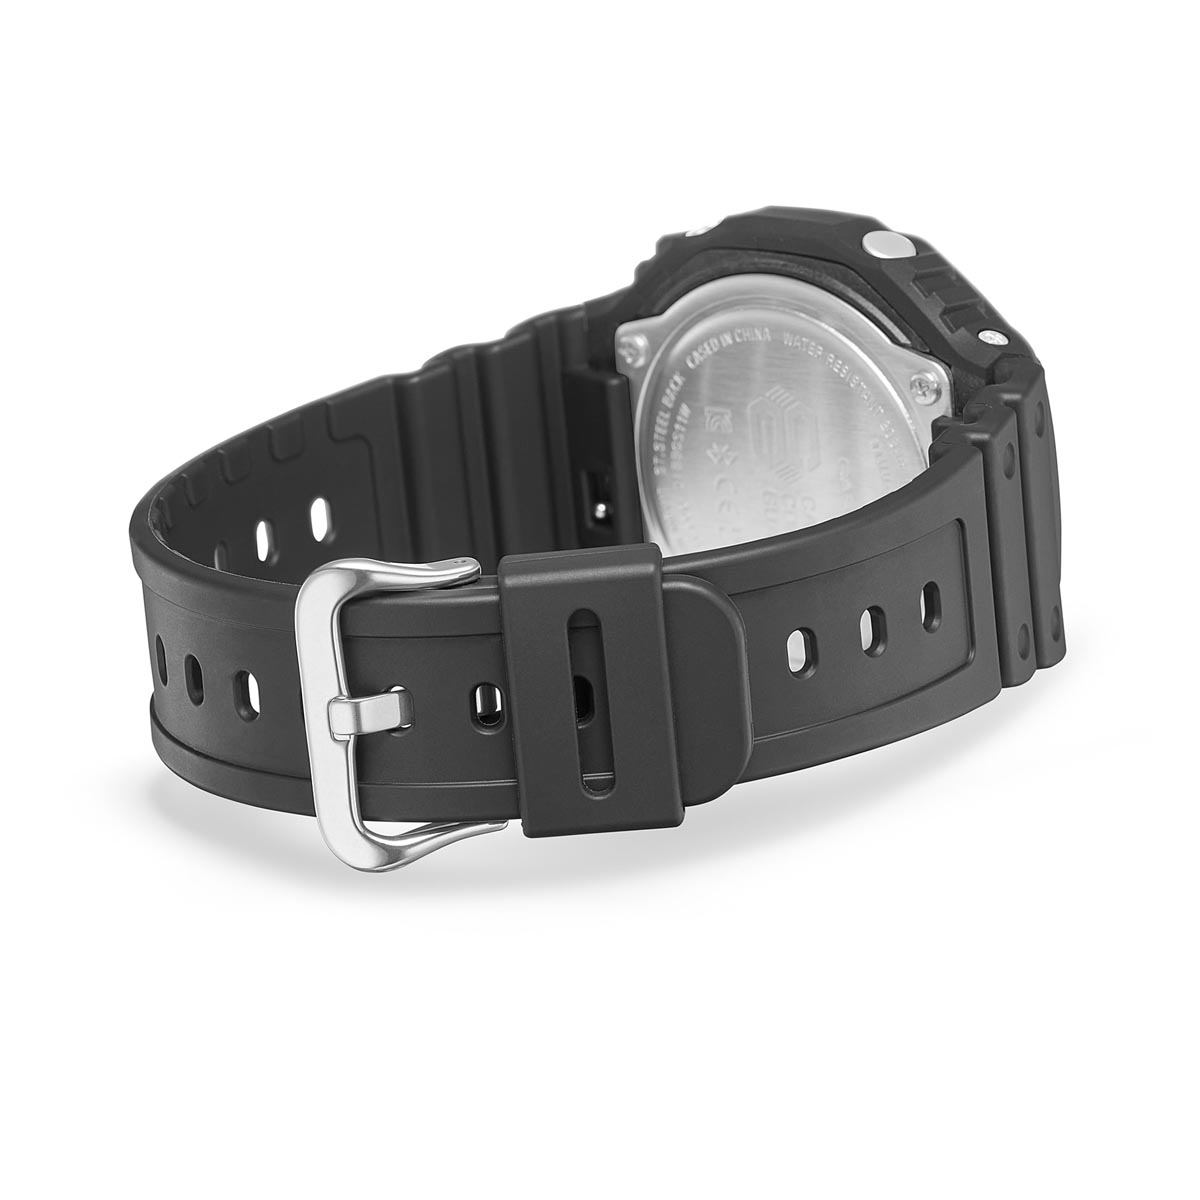 G Shock Mens Watch with Black Dial and Black Resin Strap (solar movement)